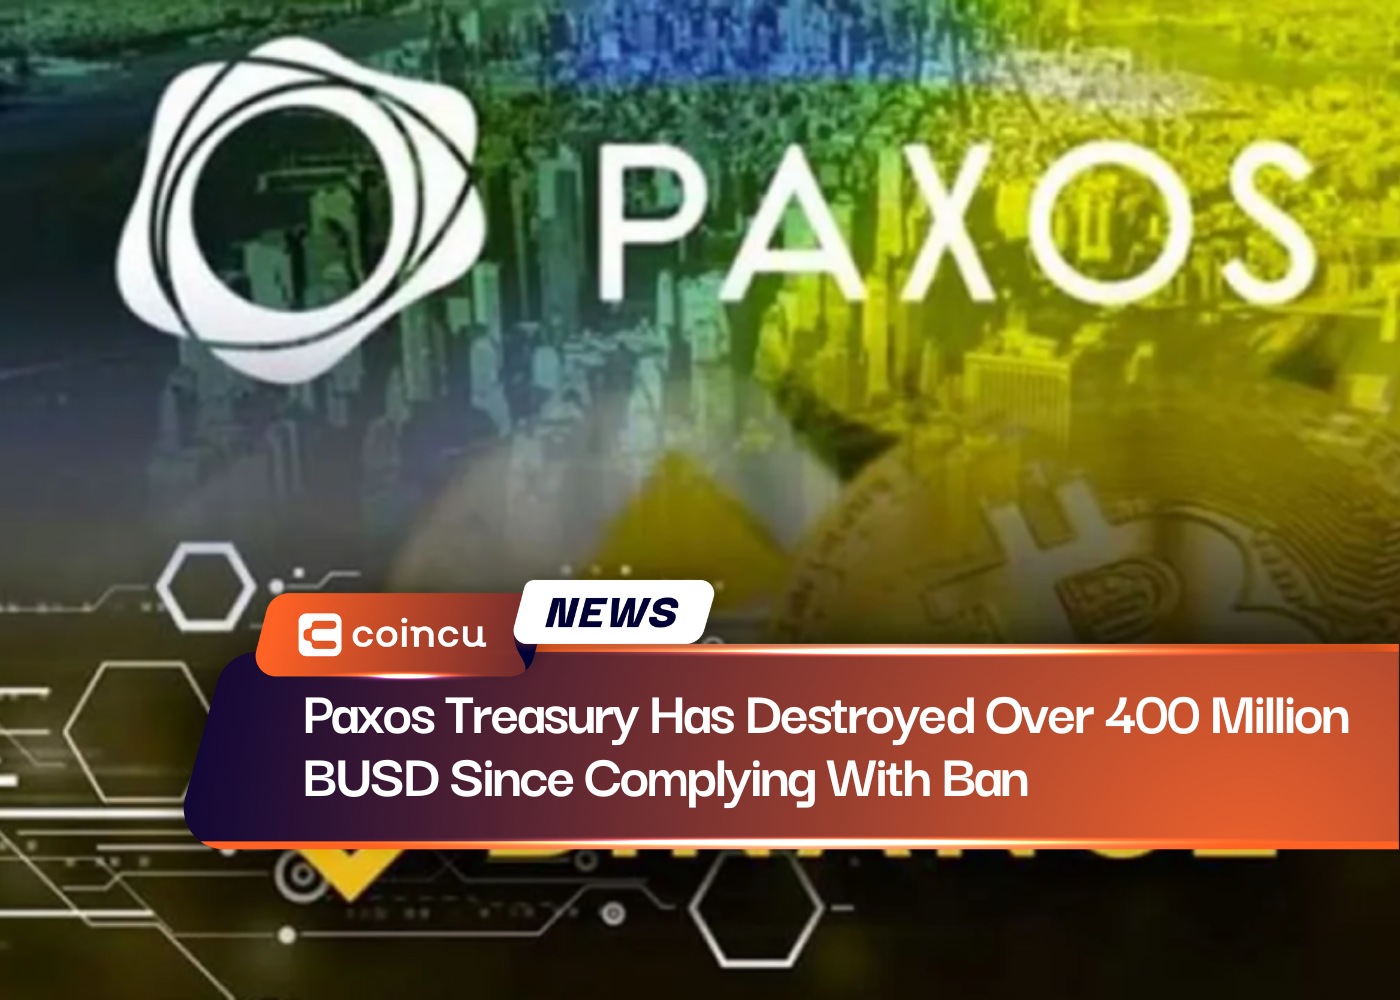 Paxos Treasury Has Destroyed Over 400 Million BUSD Since Complying With Ban